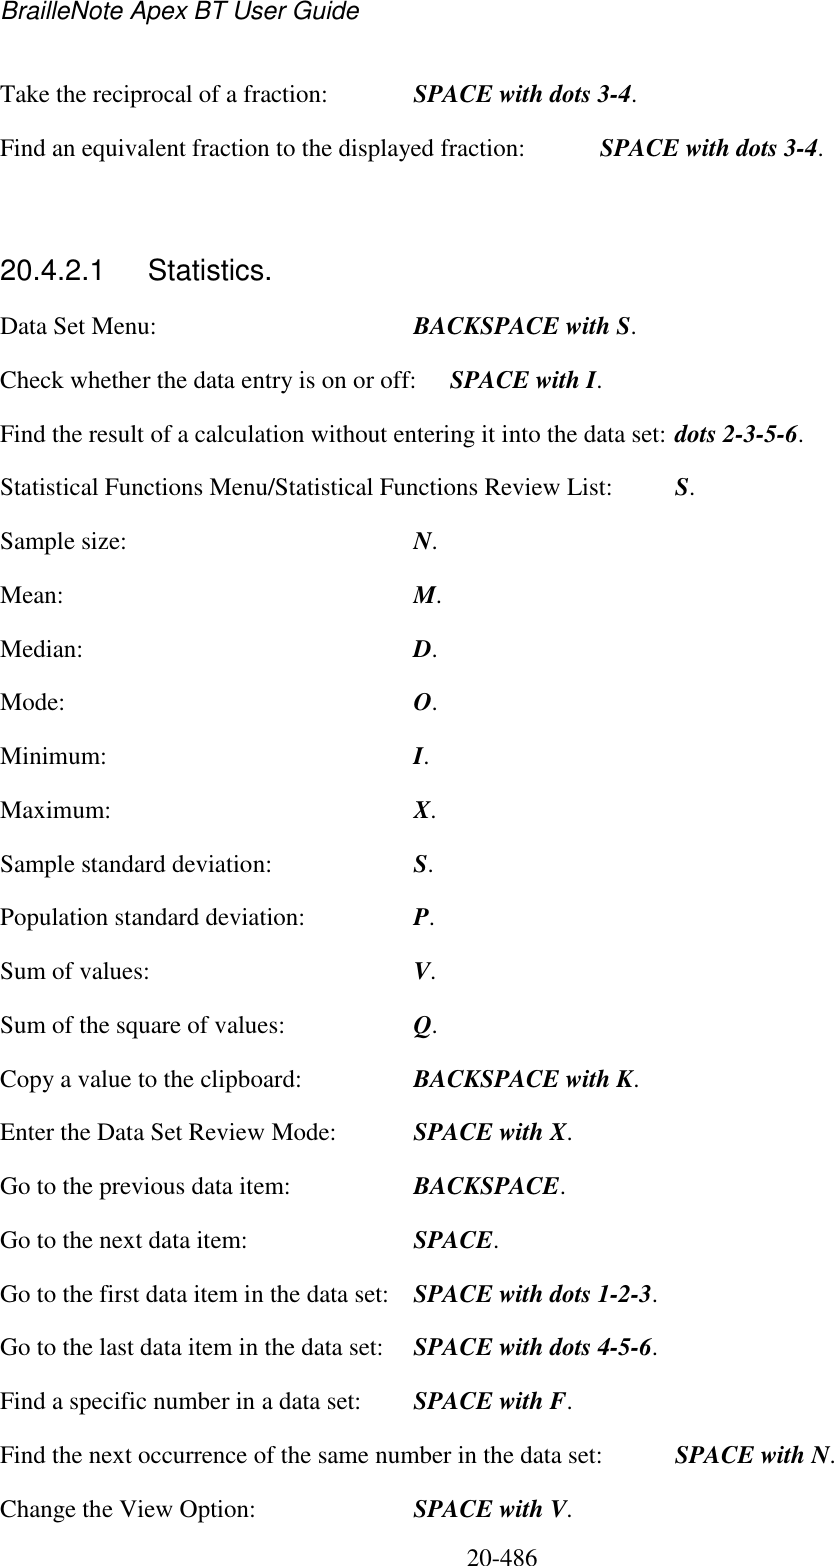 BrailleNote Apex BT User Guide   20-486   Take the reciprocal of a fraction:  SPACE with dots 3-4.     Find an equivalent fraction to the displayed fraction:  SPACE with dots 3-4.  20.4.2.1  Statistics. Data Set Menu:  BACKSPACE with S. Check whether the data entry is on or off:  SPACE with I. Find the result of a calculation without entering it into the data set: dots 2-3-5-6. Statistical Functions Menu/Statistical Functions Review List:  S. Sample size:  N. Mean:  M. Median:  D. Mode:   O. Minimum:  I. Maximum:  X. Sample standard deviation:  S. Population standard deviation:  P. Sum of values:  V. Sum of the square of values:  Q. Copy a value to the clipboard:  BACKSPACE with K. Enter the Data Set Review Mode:  SPACE with X. Go to the previous data item:  BACKSPACE. Go to the next data item:  SPACE. Go to the first data item in the data set:  SPACE with dots 1-2-3. Go to the last data item in the data set:  SPACE with dots 4-5-6. Find a specific number in a data set:  SPACE with F. Find the next occurrence of the same number in the data set:  SPACE with N. Change the View Option:  SPACE with V. 